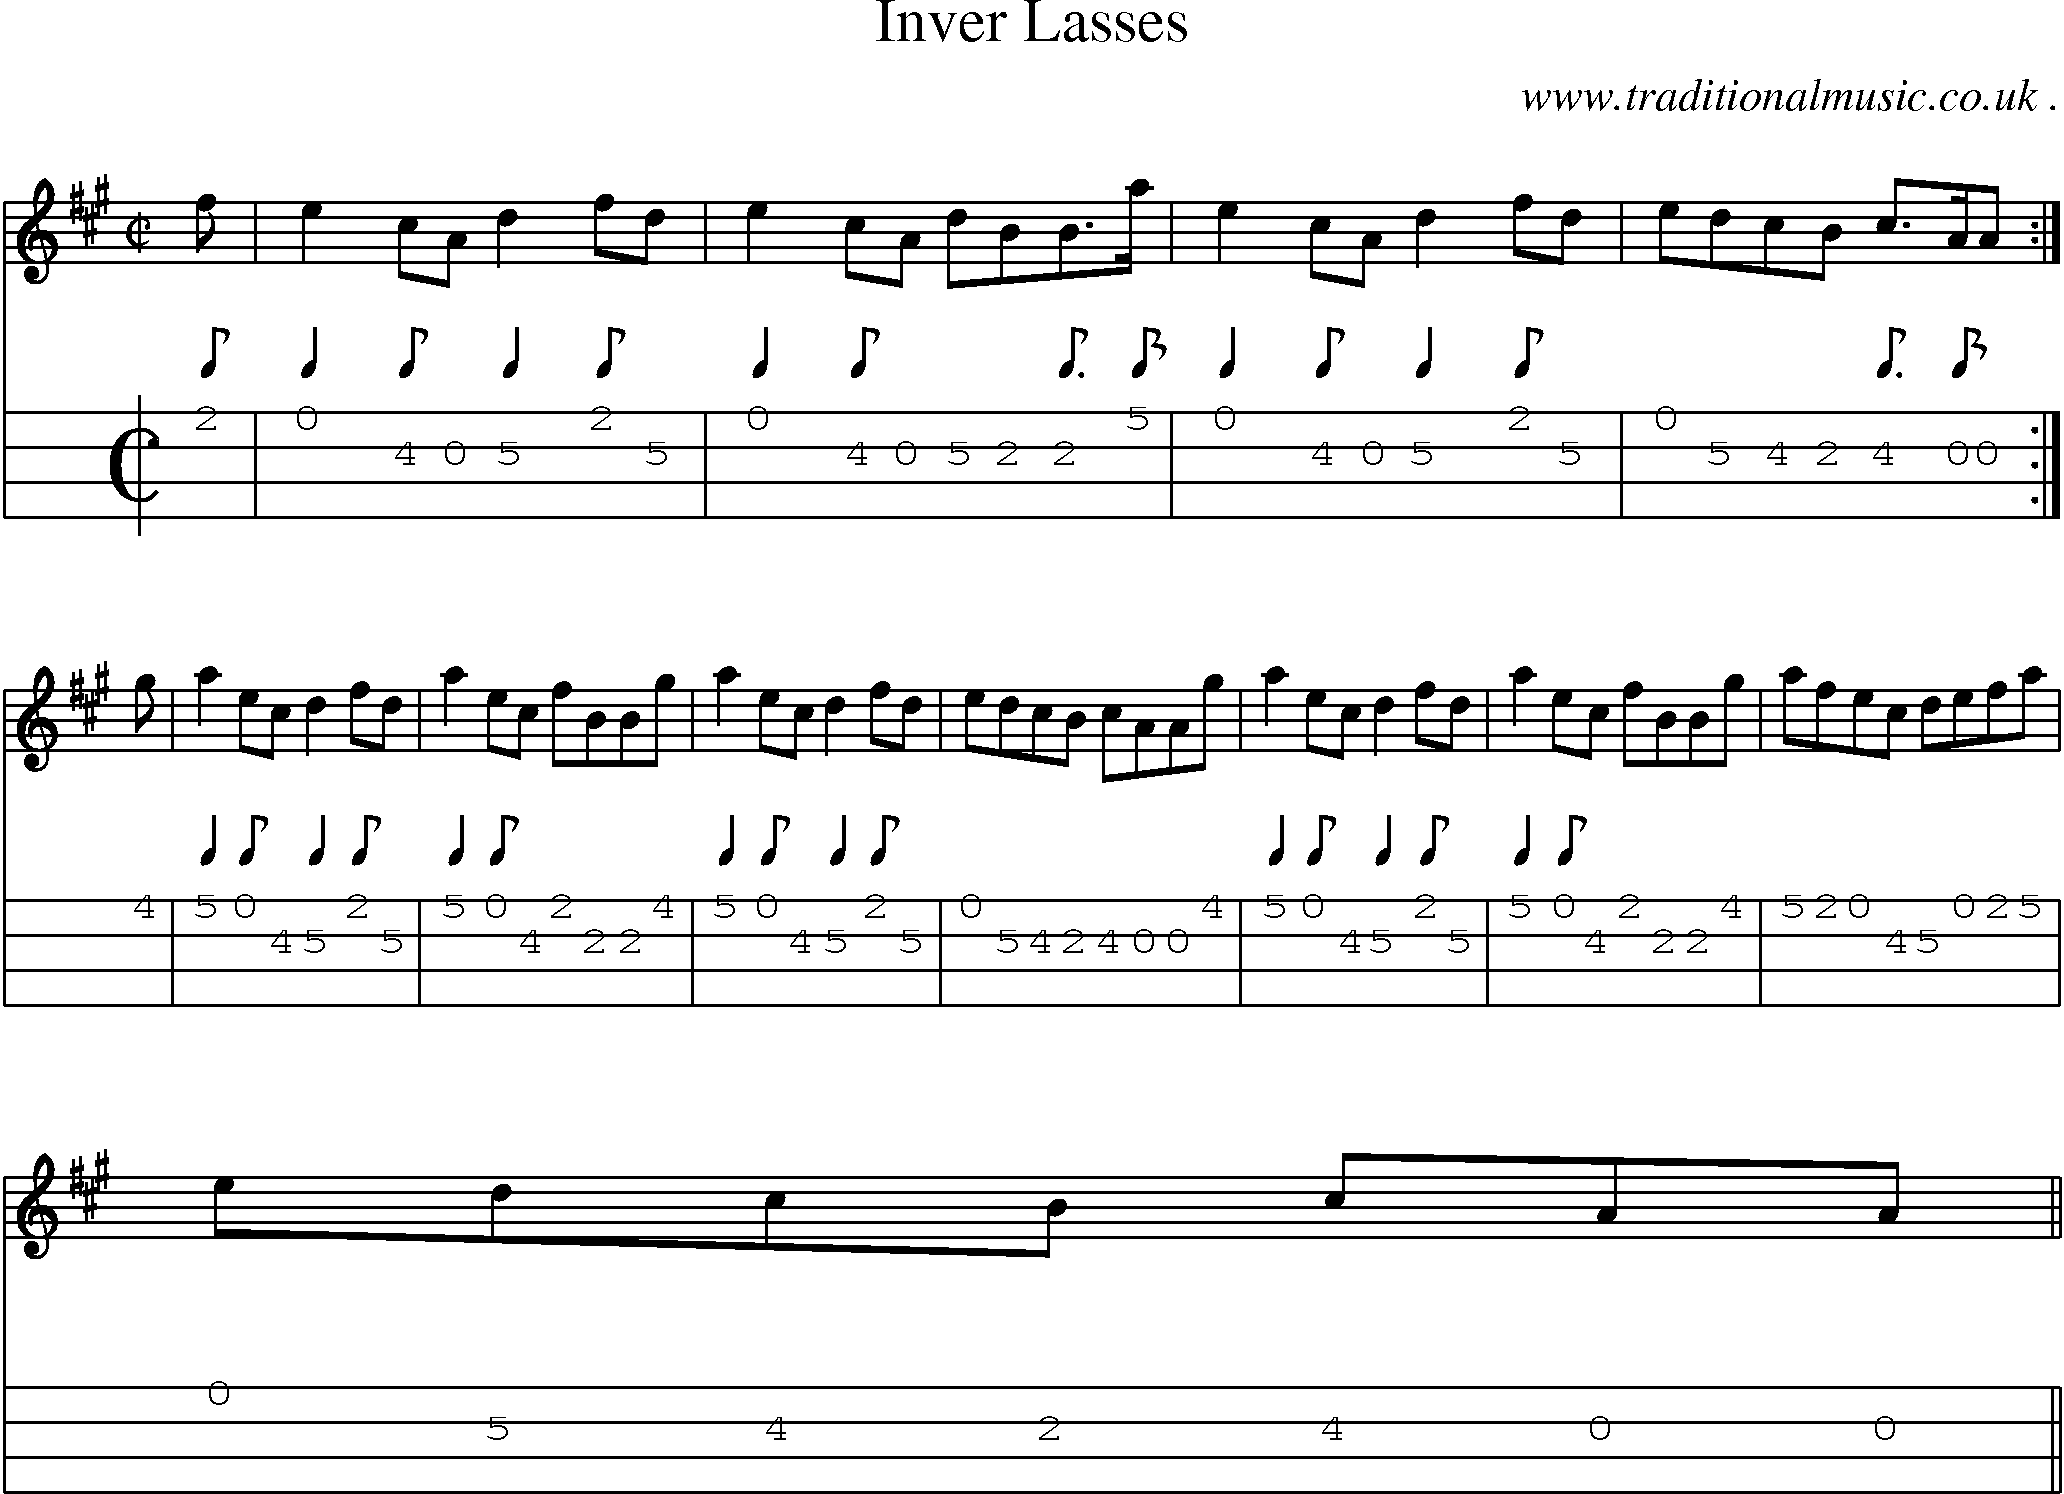 Sheet-music  score, Chords and Mandolin Tabs for Inver Lasses